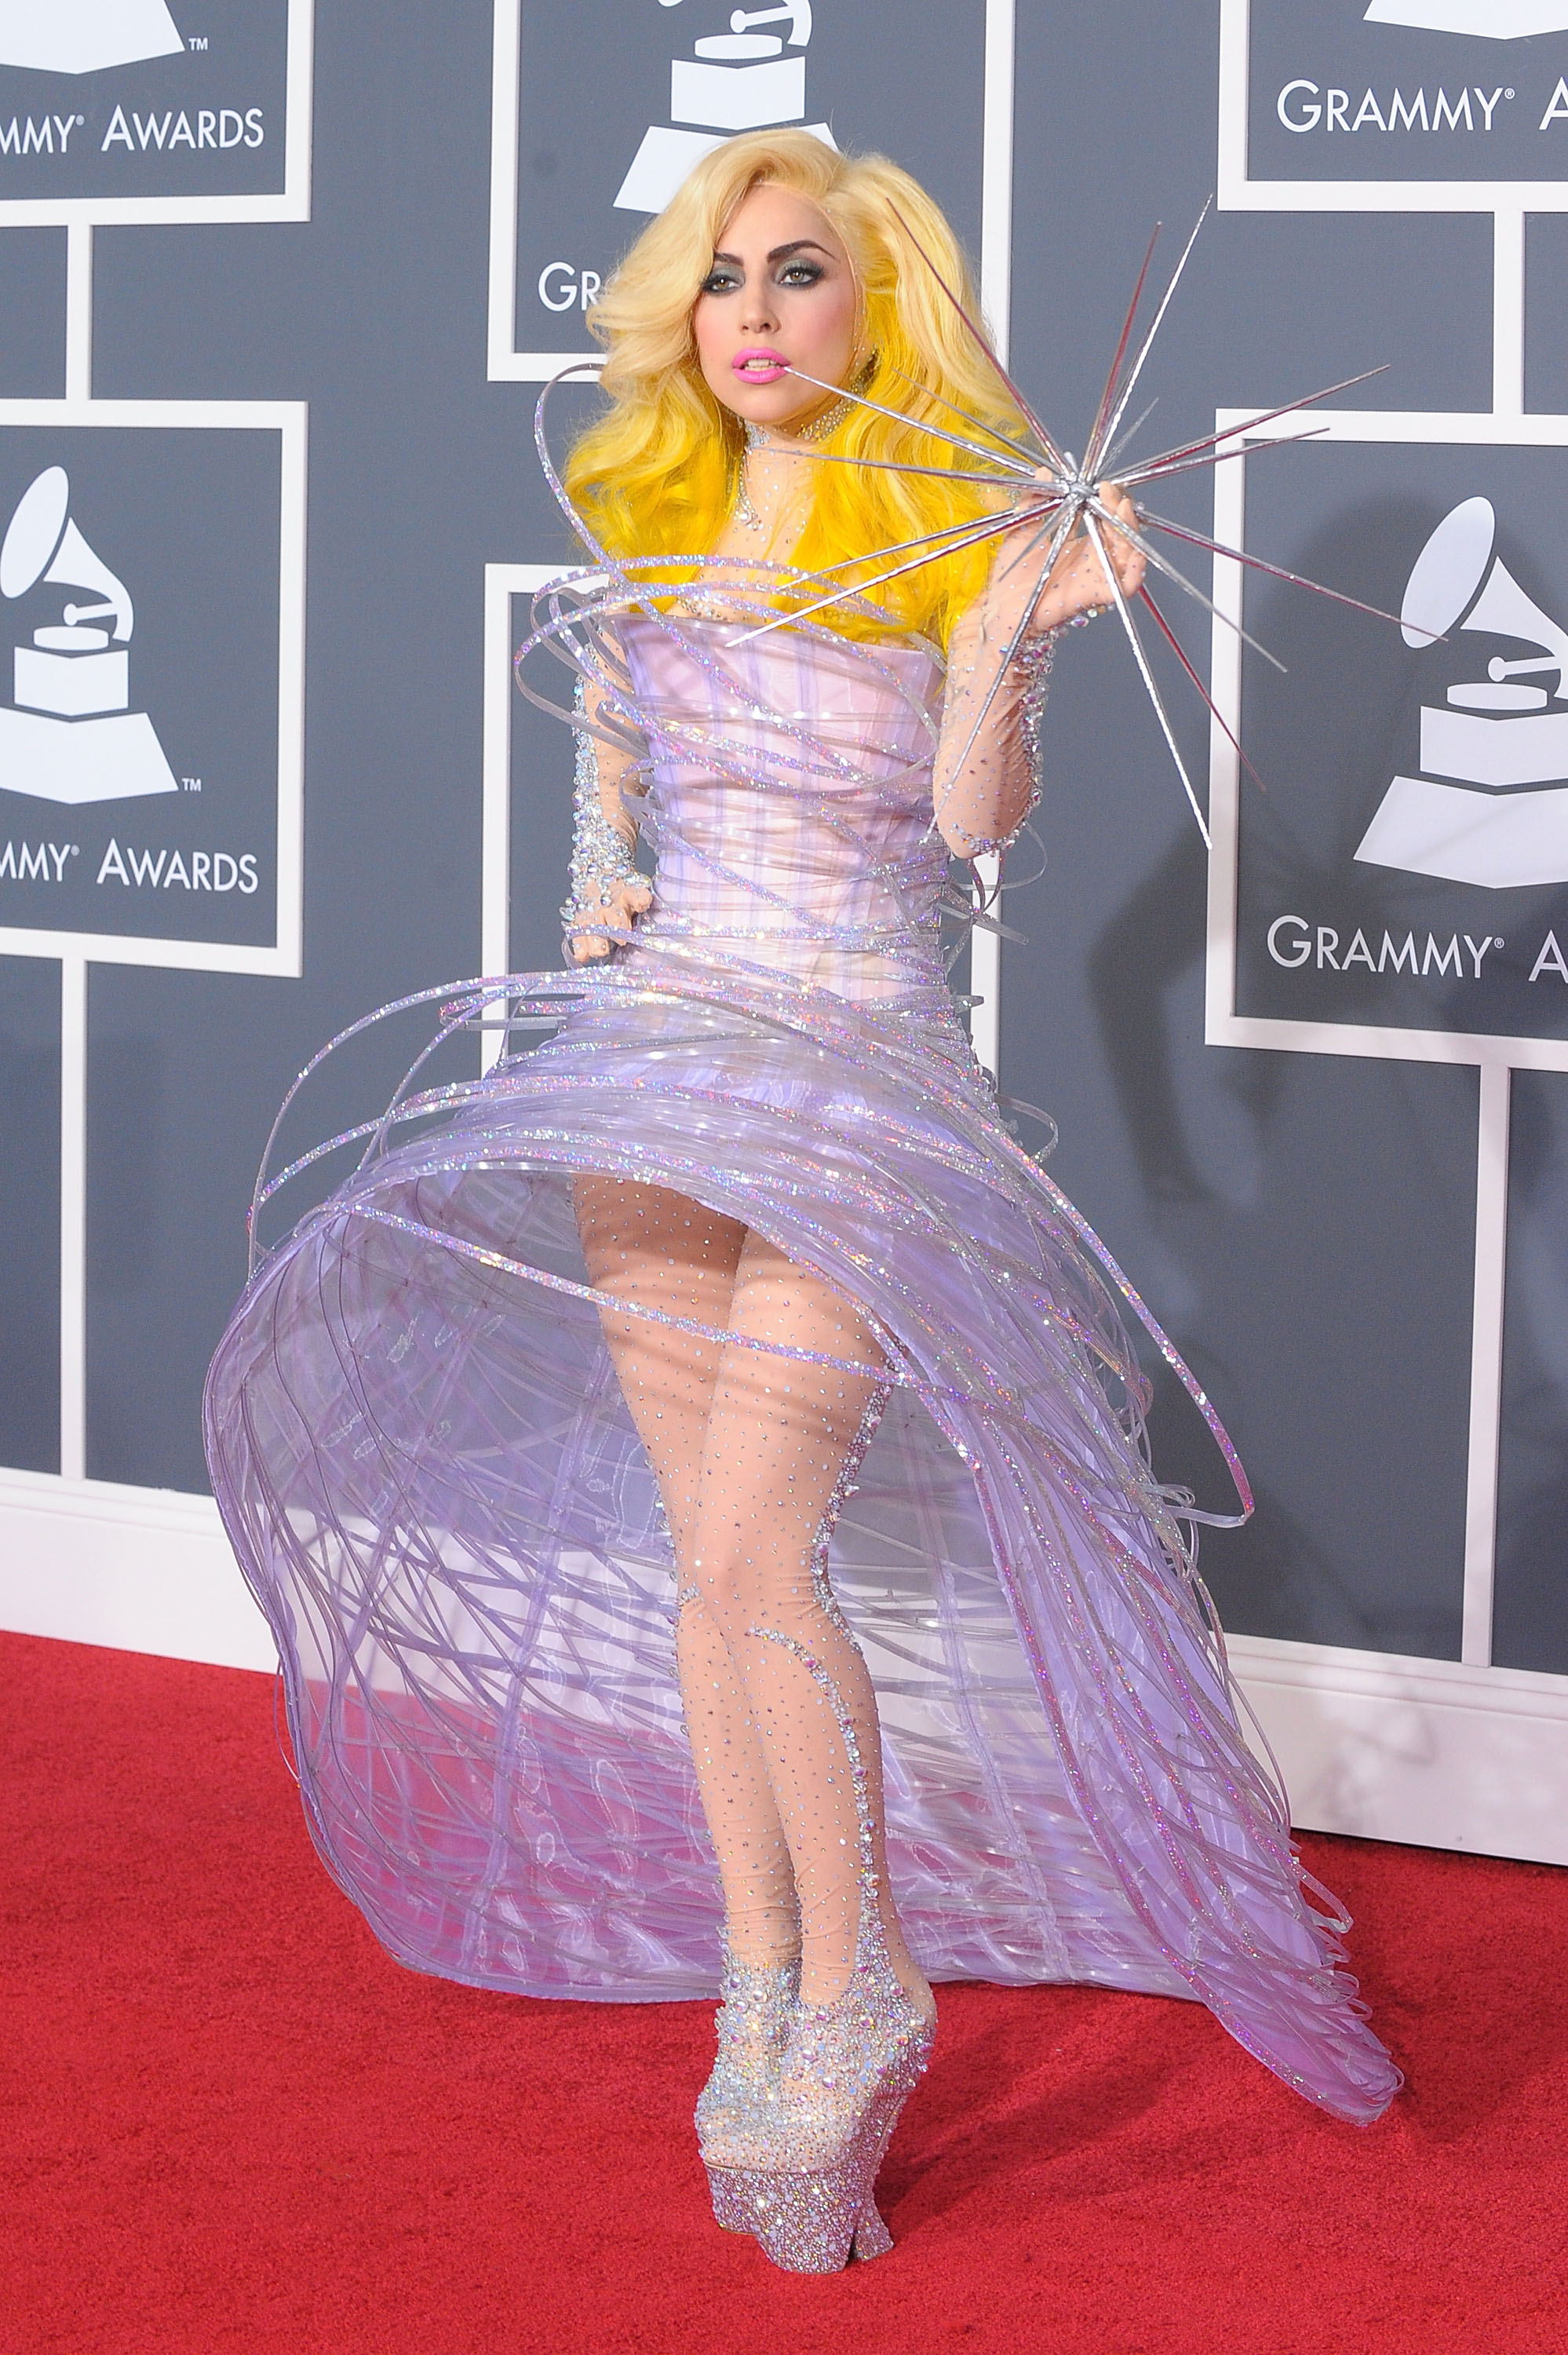 LOS ANGELES, CA - JANUARY 31:  Musician Lady Gaga arrives at the 52nd Annual GRAMMY Awards held at Staples Center on January 31, 2010 in Los Angeles, California.  (Photo by Jason Merritt/Getty Images) (Jason Merritt—Getty Images)